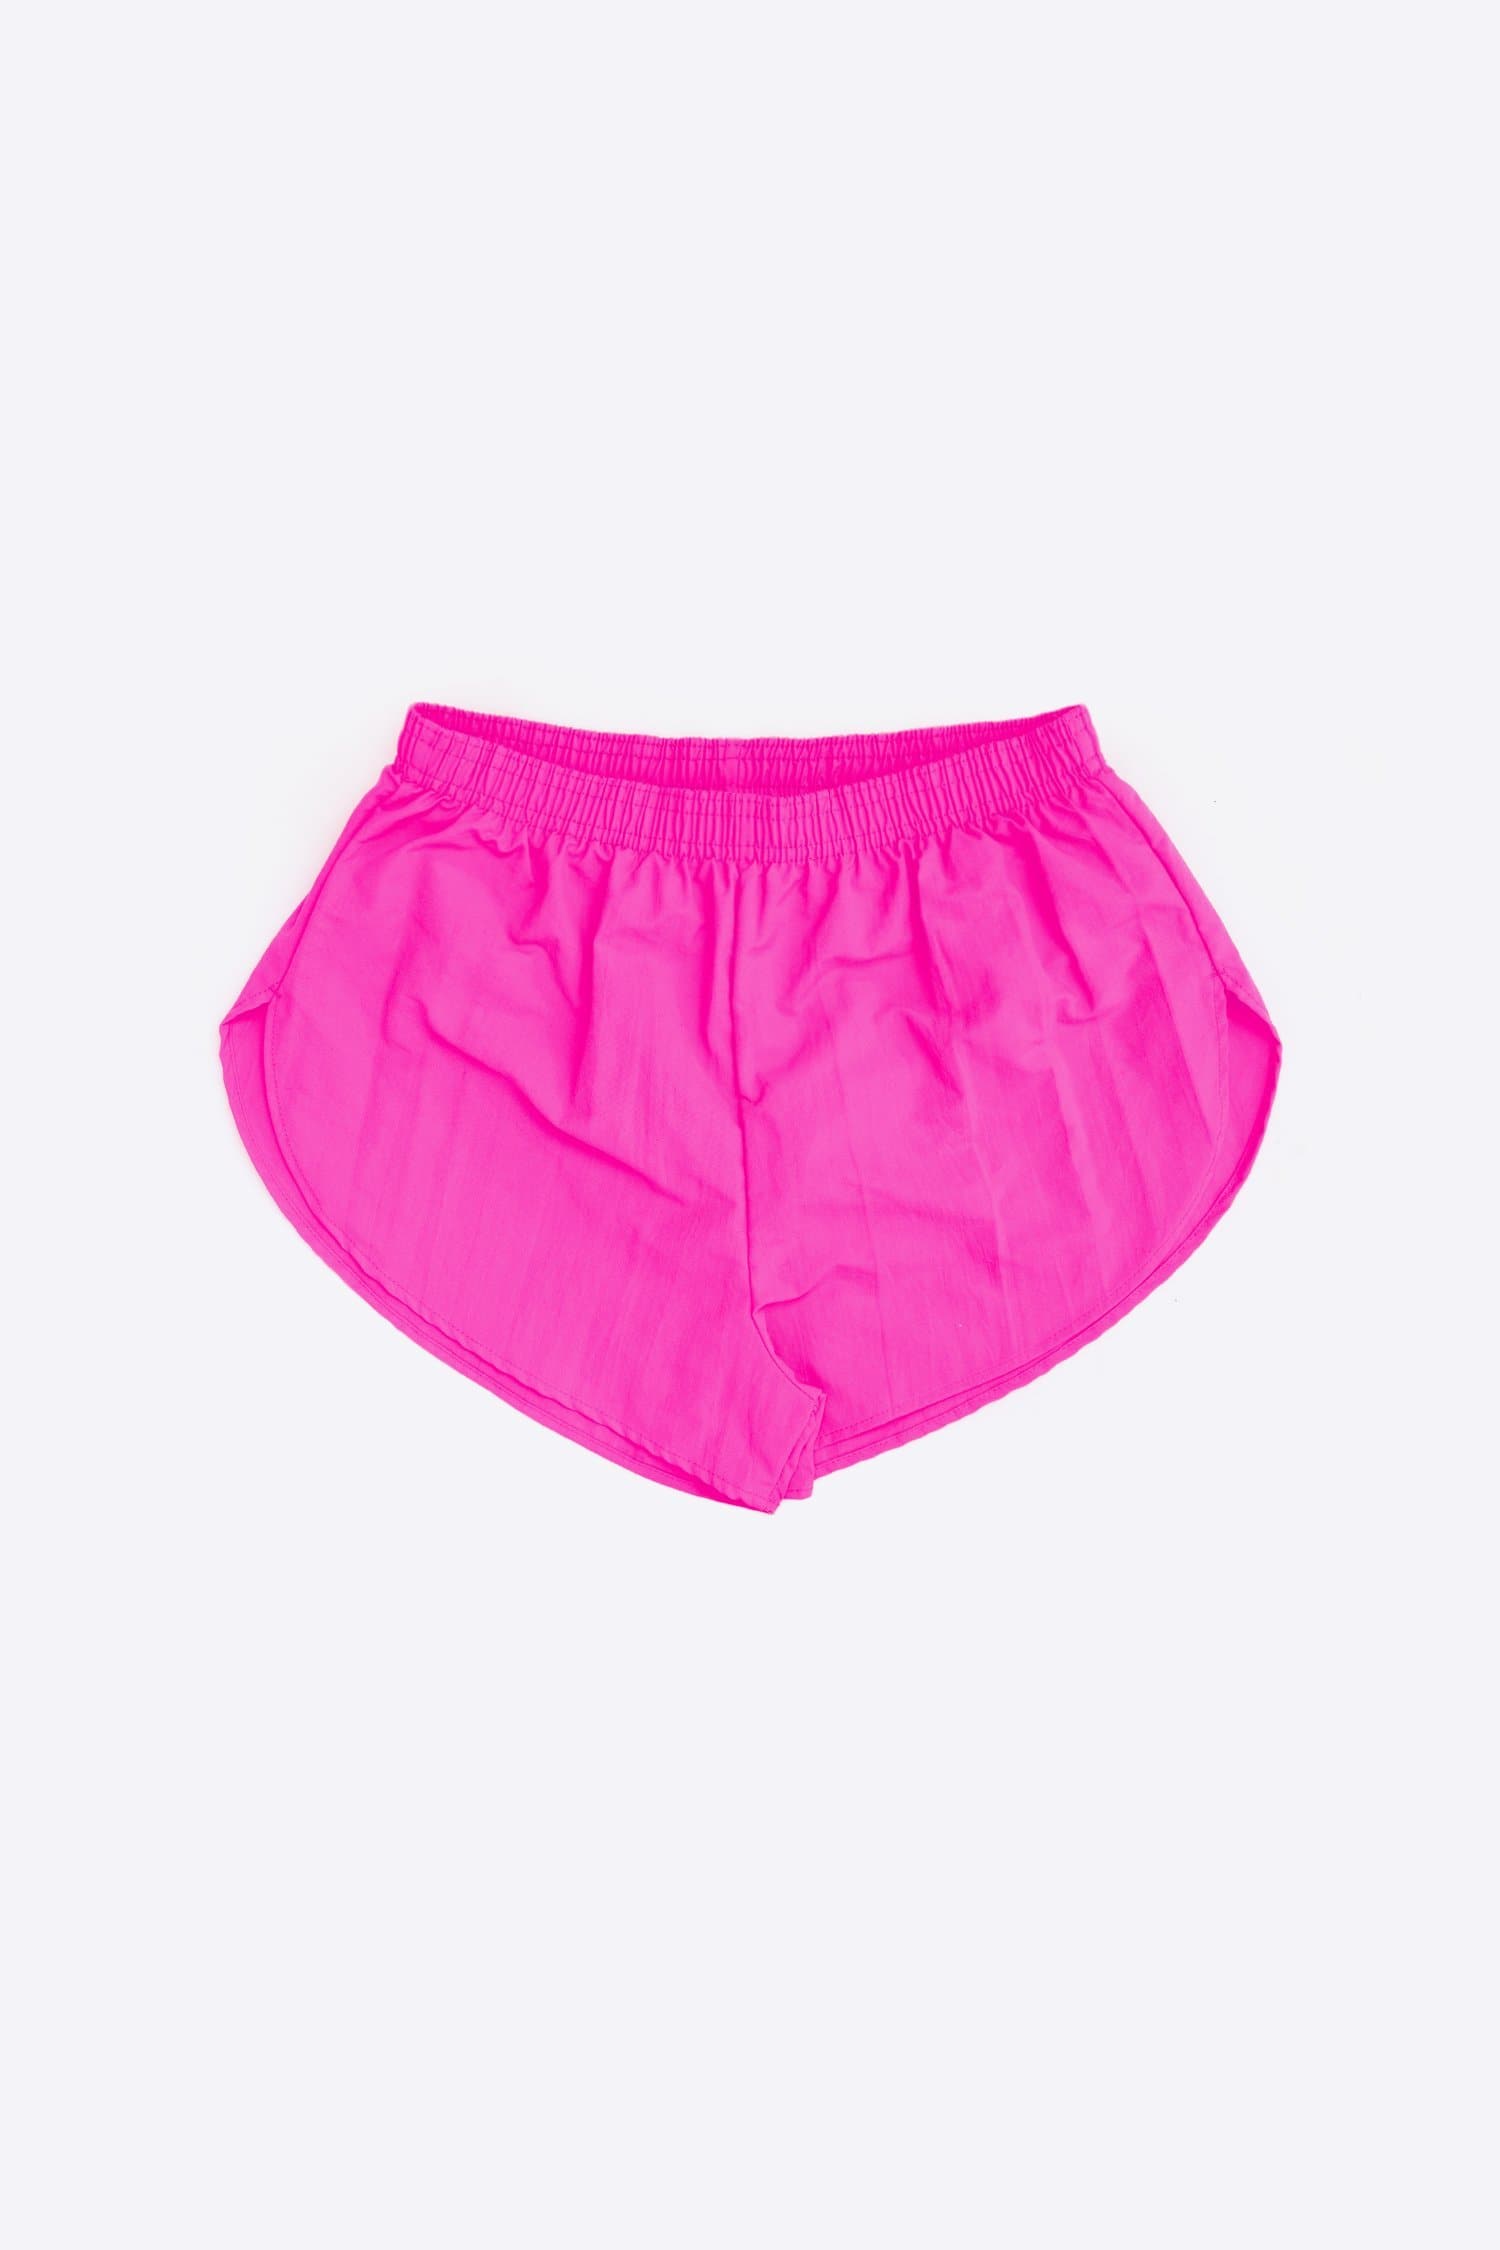  TERNEZ Shorts for Women Flare Hem Satin Shorts (Color : Baby  Pink, Size : Large) : Clothing, Shoes & Jewelry